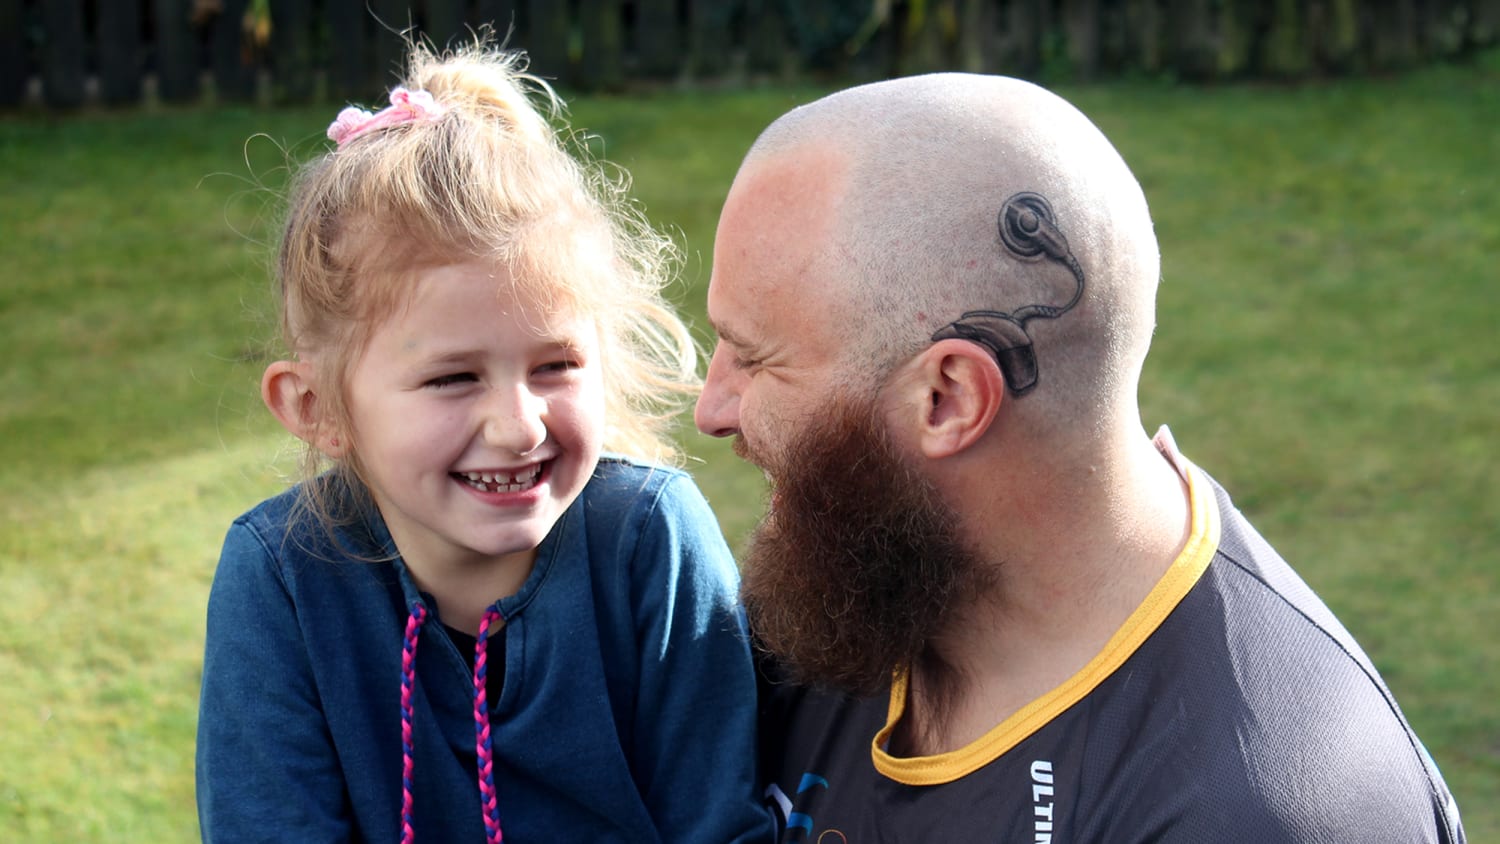 Dad gets cochlear implant tattoo to match deaf daughter's device